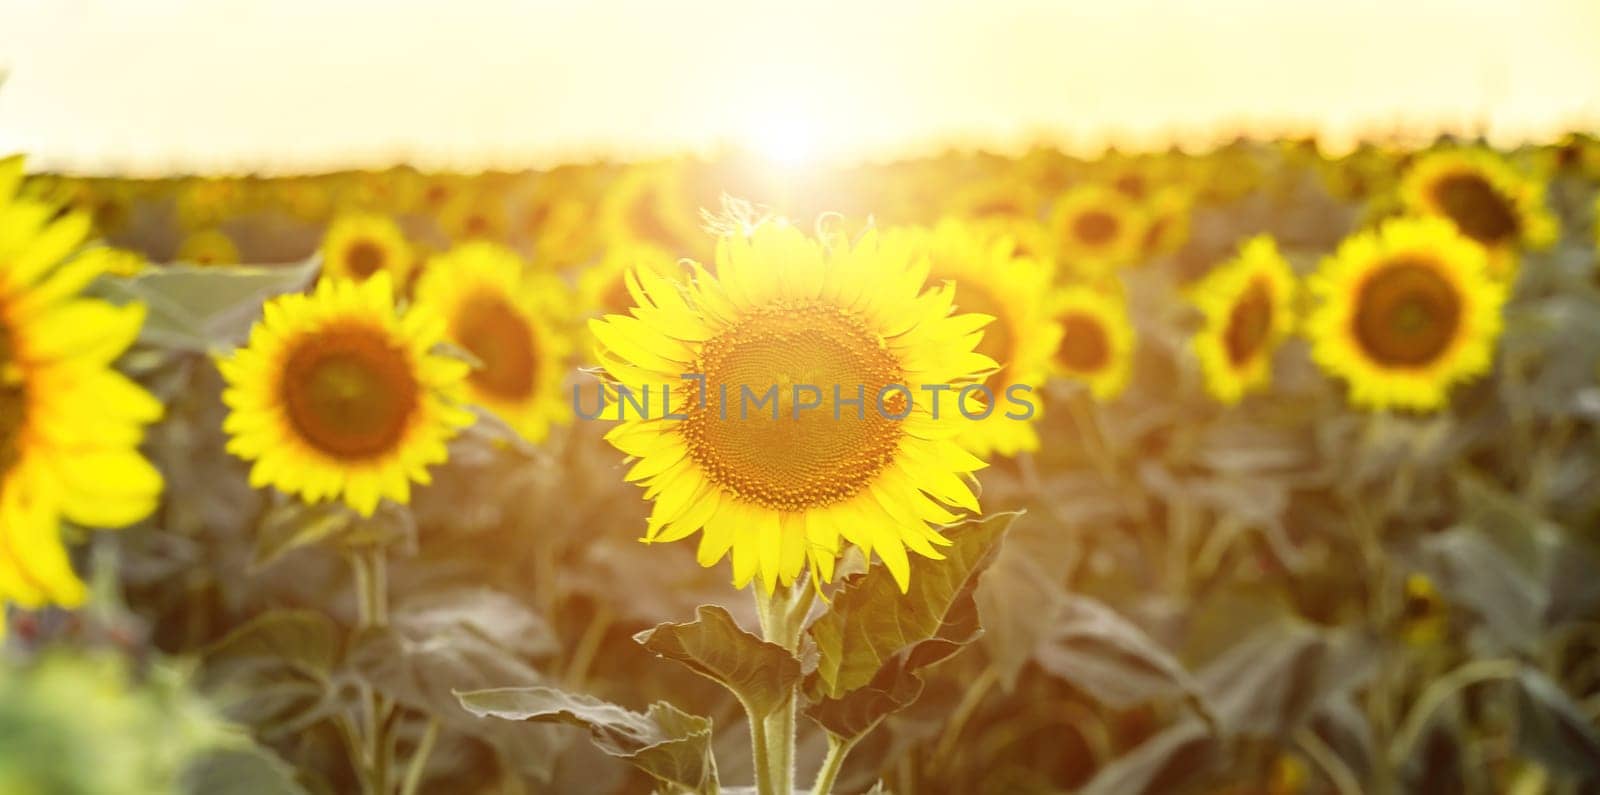 Sunflower garden. field of blooming sunflowers against the backdrop of sunset. The best kind of sunflower in bloom. Growing sunflowers to make oil